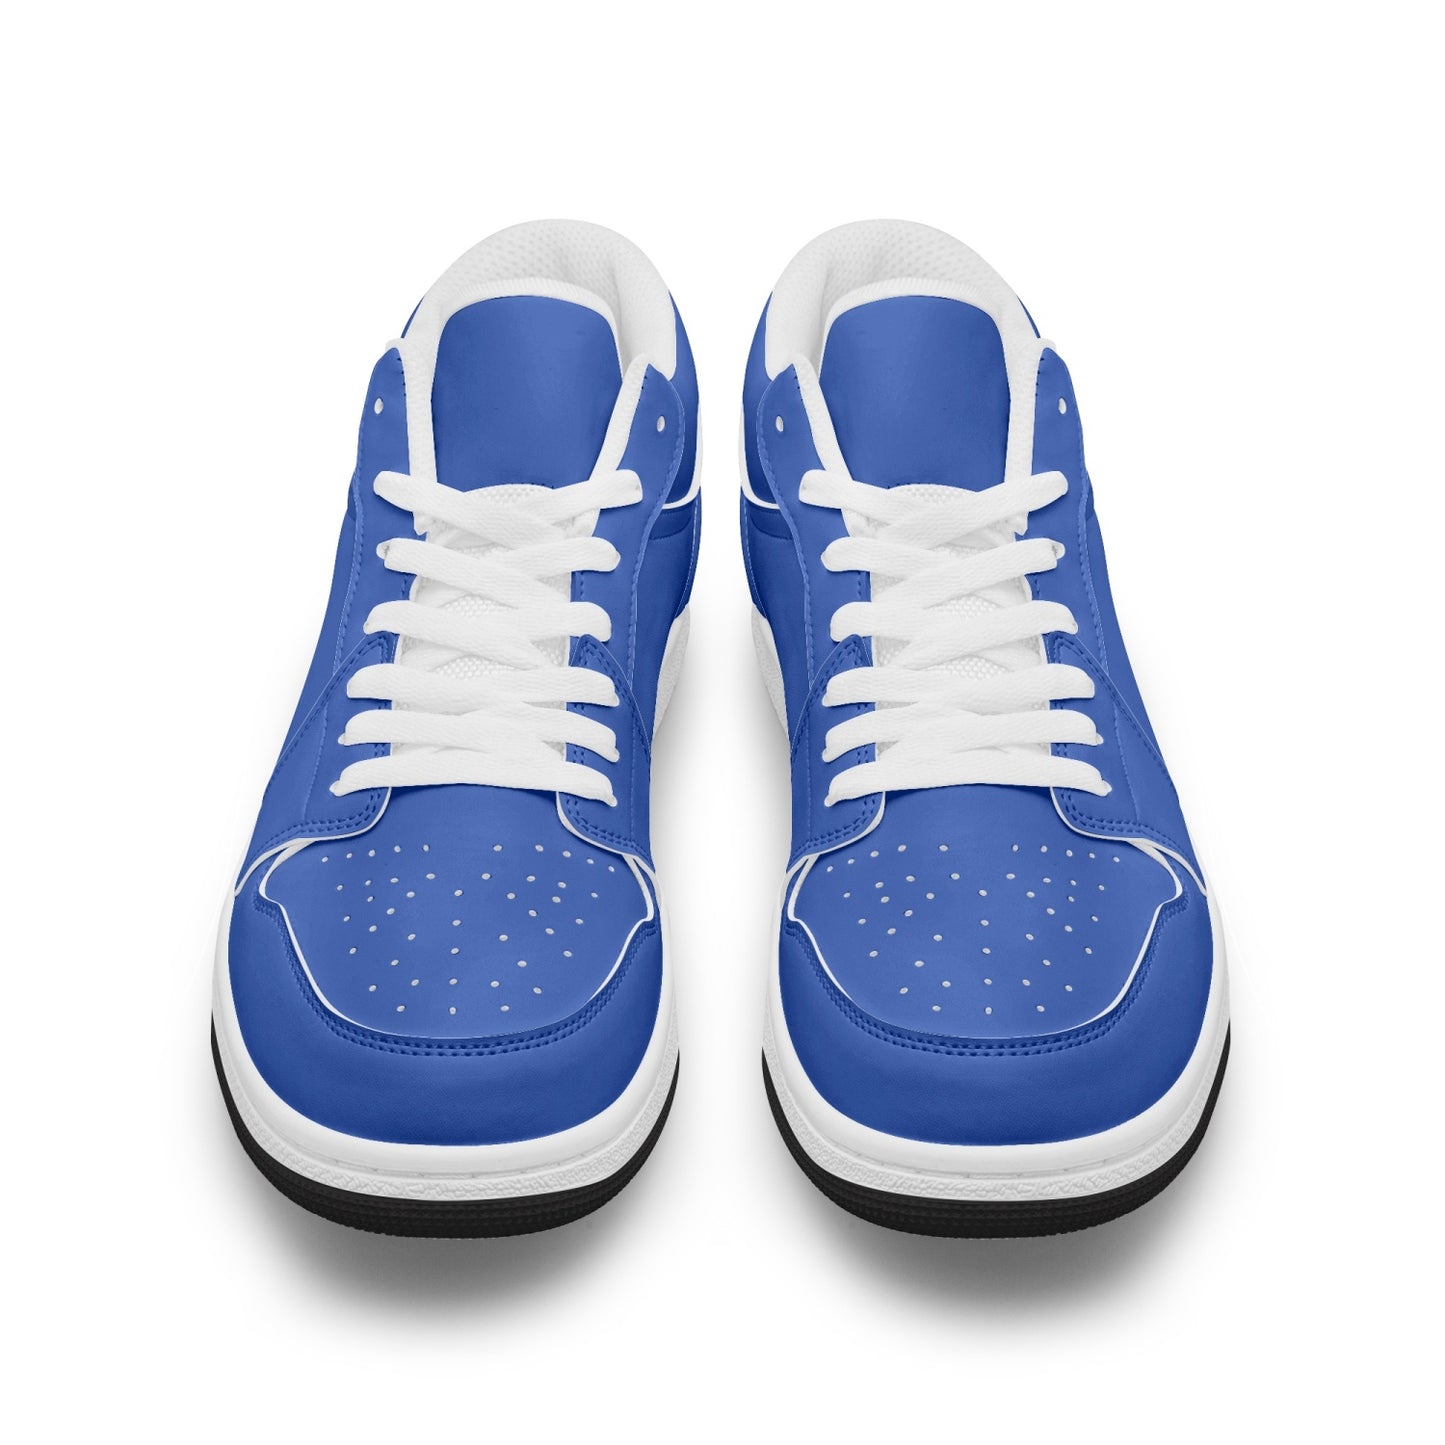 Israeli Blue Low-Top Leather Sneakers both white laces front